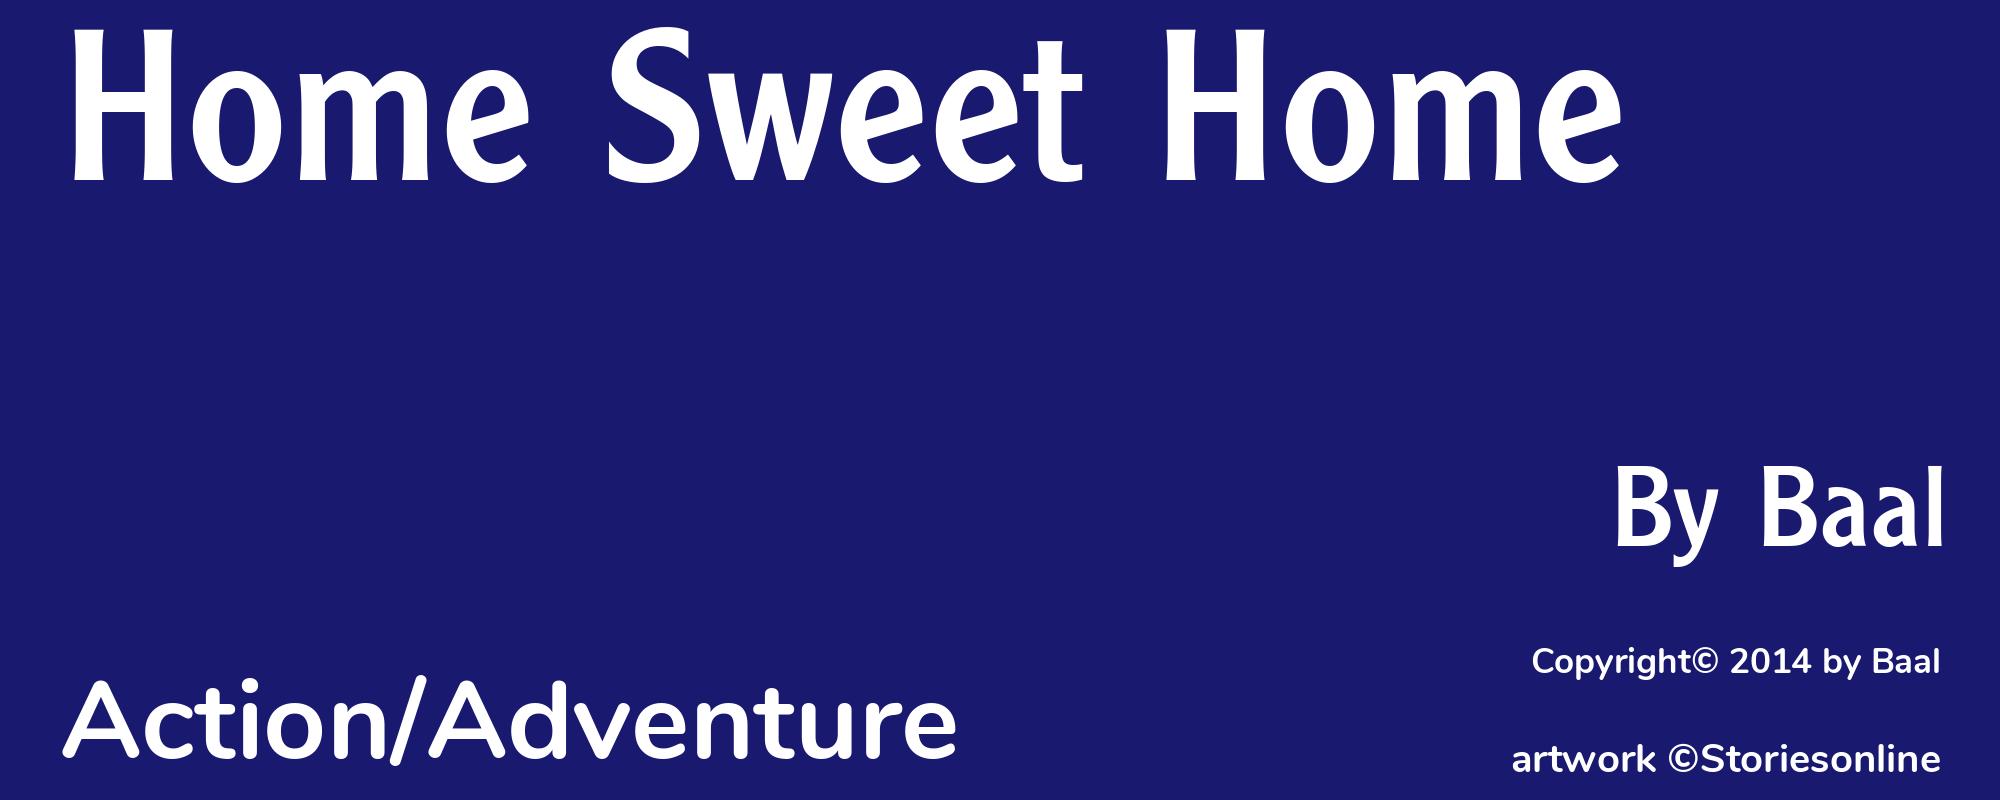 Home Sweet Home - Cover